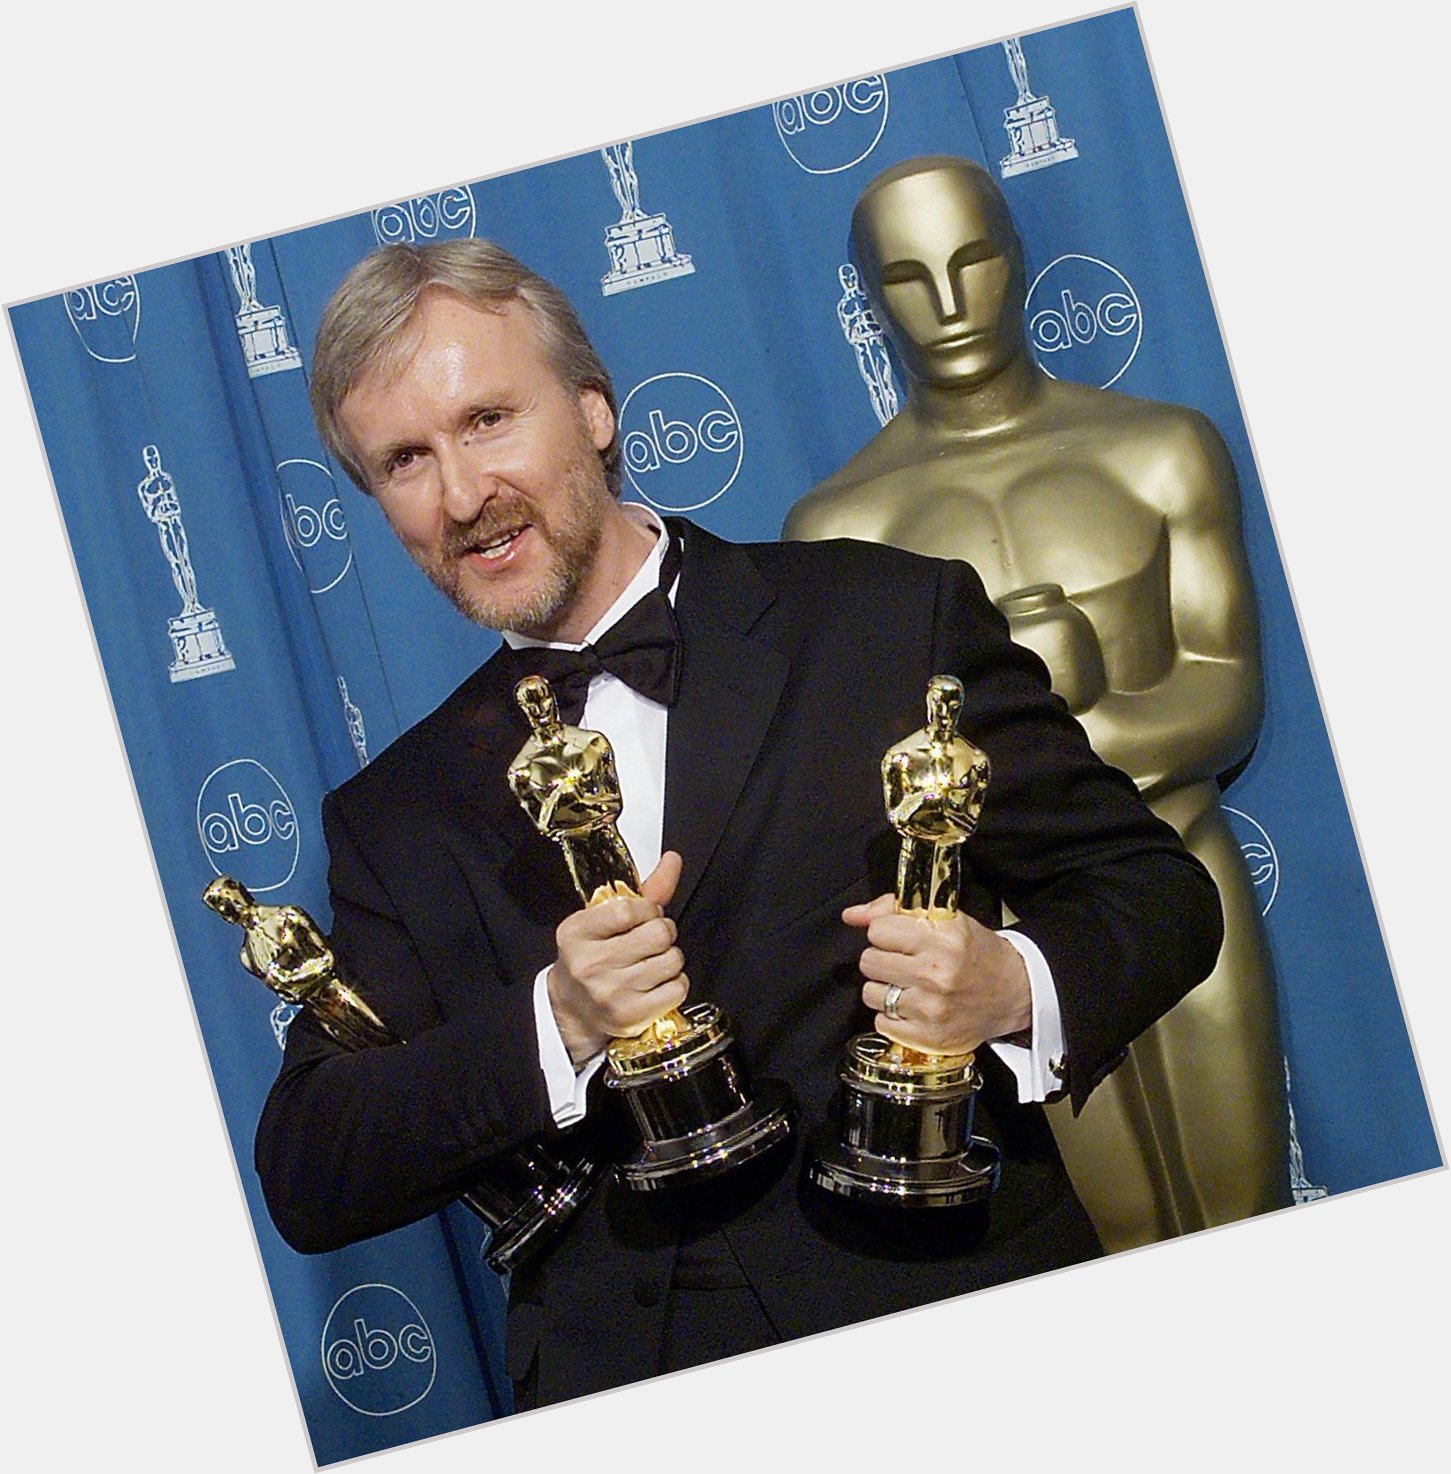 Happy Birthday to James Cameron who turns 63 today! 